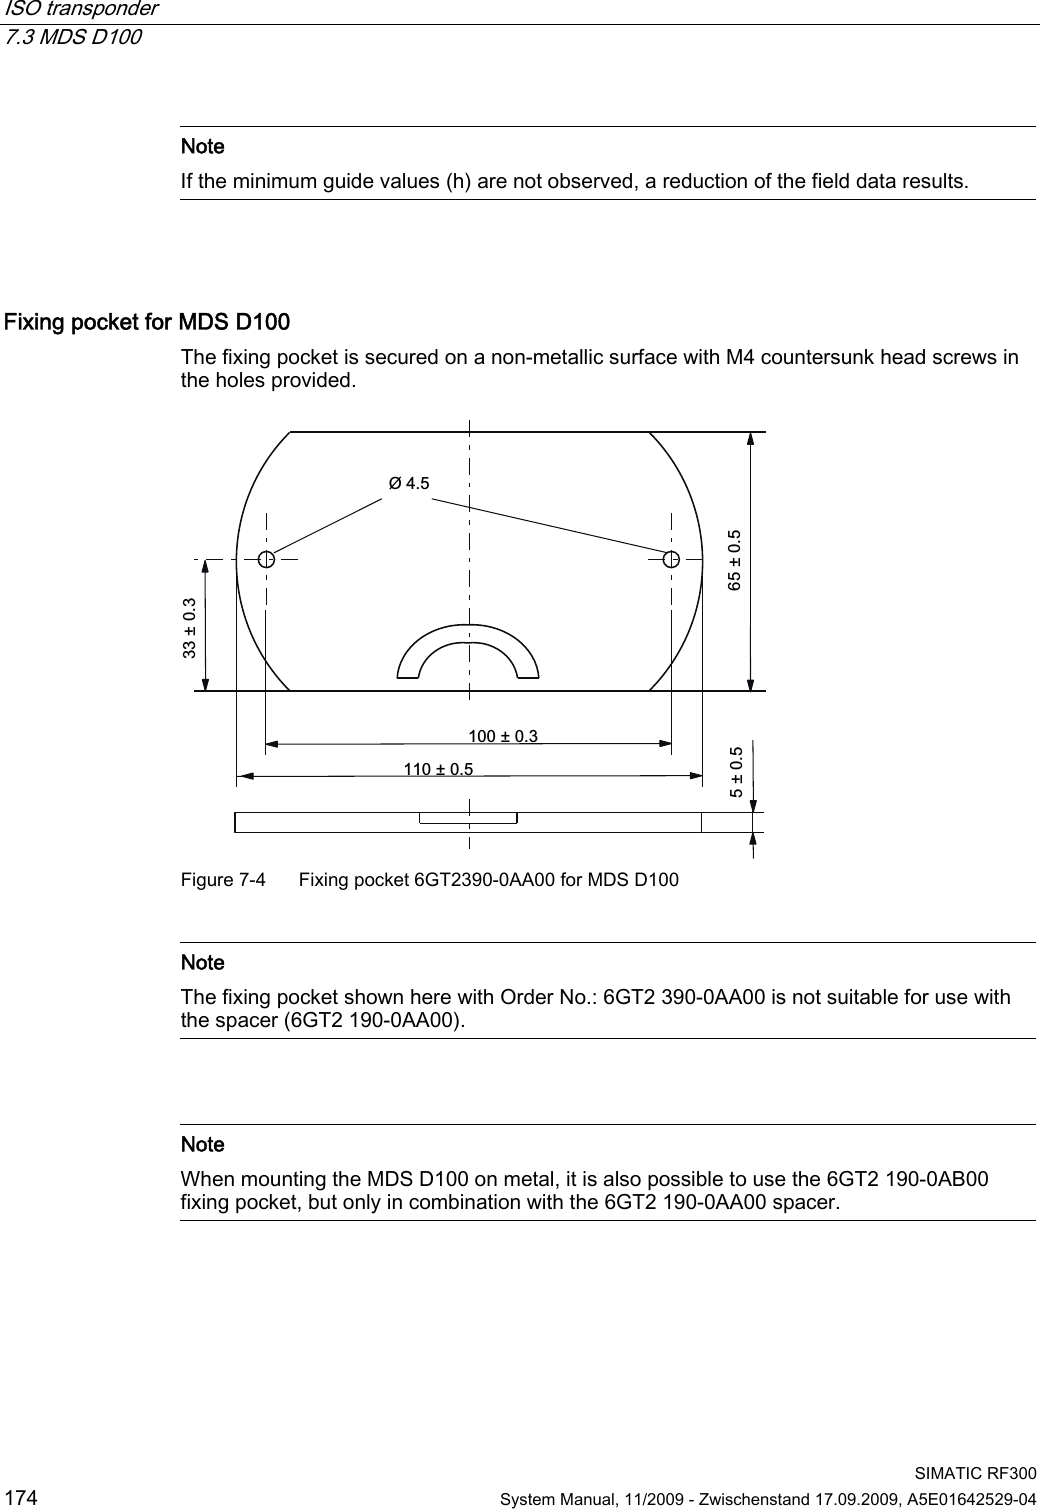 ISO transponder   7.3 MDS D100  SIMATIC RF300 174  System Manual, 11/2009 - Zwischenstand 17.09.2009, A5E01642529-04   Note If the minimum guide values (h) are not observed, a reduction of the field data results.   Fixing pocket for MDS D100  The fixing pocket is secured on a non-metallic surface with M4 countersunk head screws in the holes provided. sssss Figure 7-4  Fixing pocket 6GT2390-0AA00 for MDS D100   Note The fixing pocket shown here with Order No.: 6GT2 390-0AA00 is not suitable for use with the spacer (6GT2 190-0AA00).     Note When mounting the MDS D100 on metal, it is also possible to use the 6GT2 190-0AB00 fixing pocket, but only in combination with the 6GT2 190-0AA00 spacer.  